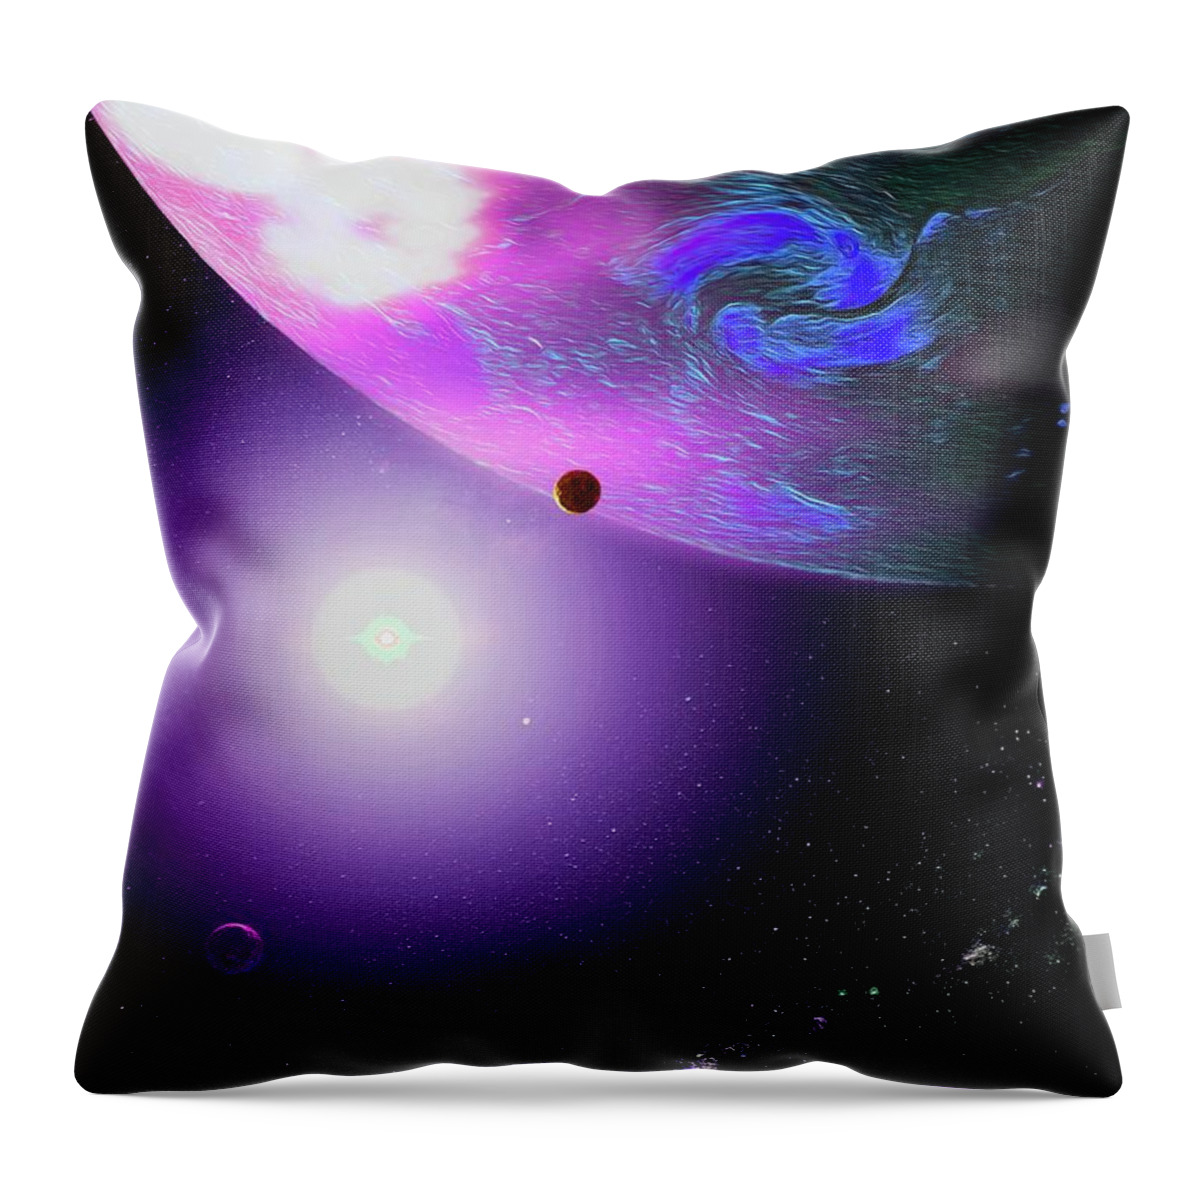  Throw Pillow featuring the digital art Outer Space Giant Planet and Moons by Don White Artdreamer